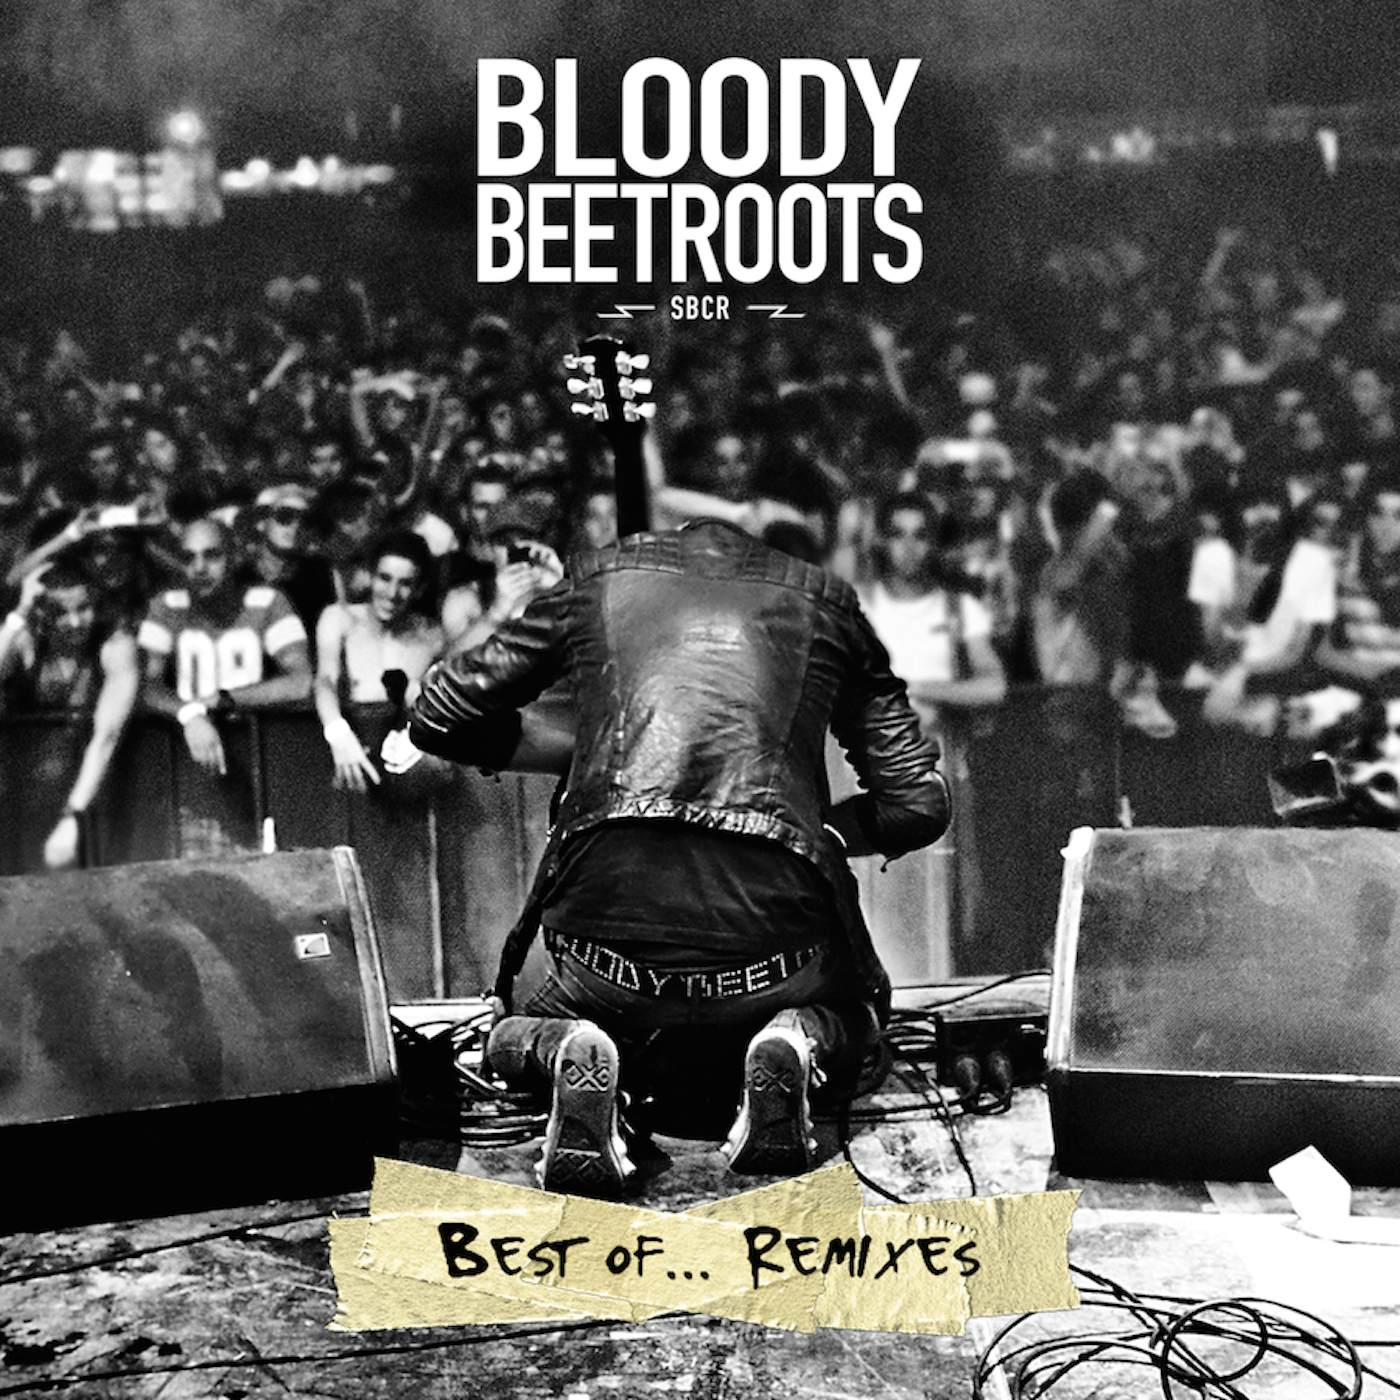 The Bloody Beetroots BEST OF: REMIXES CD